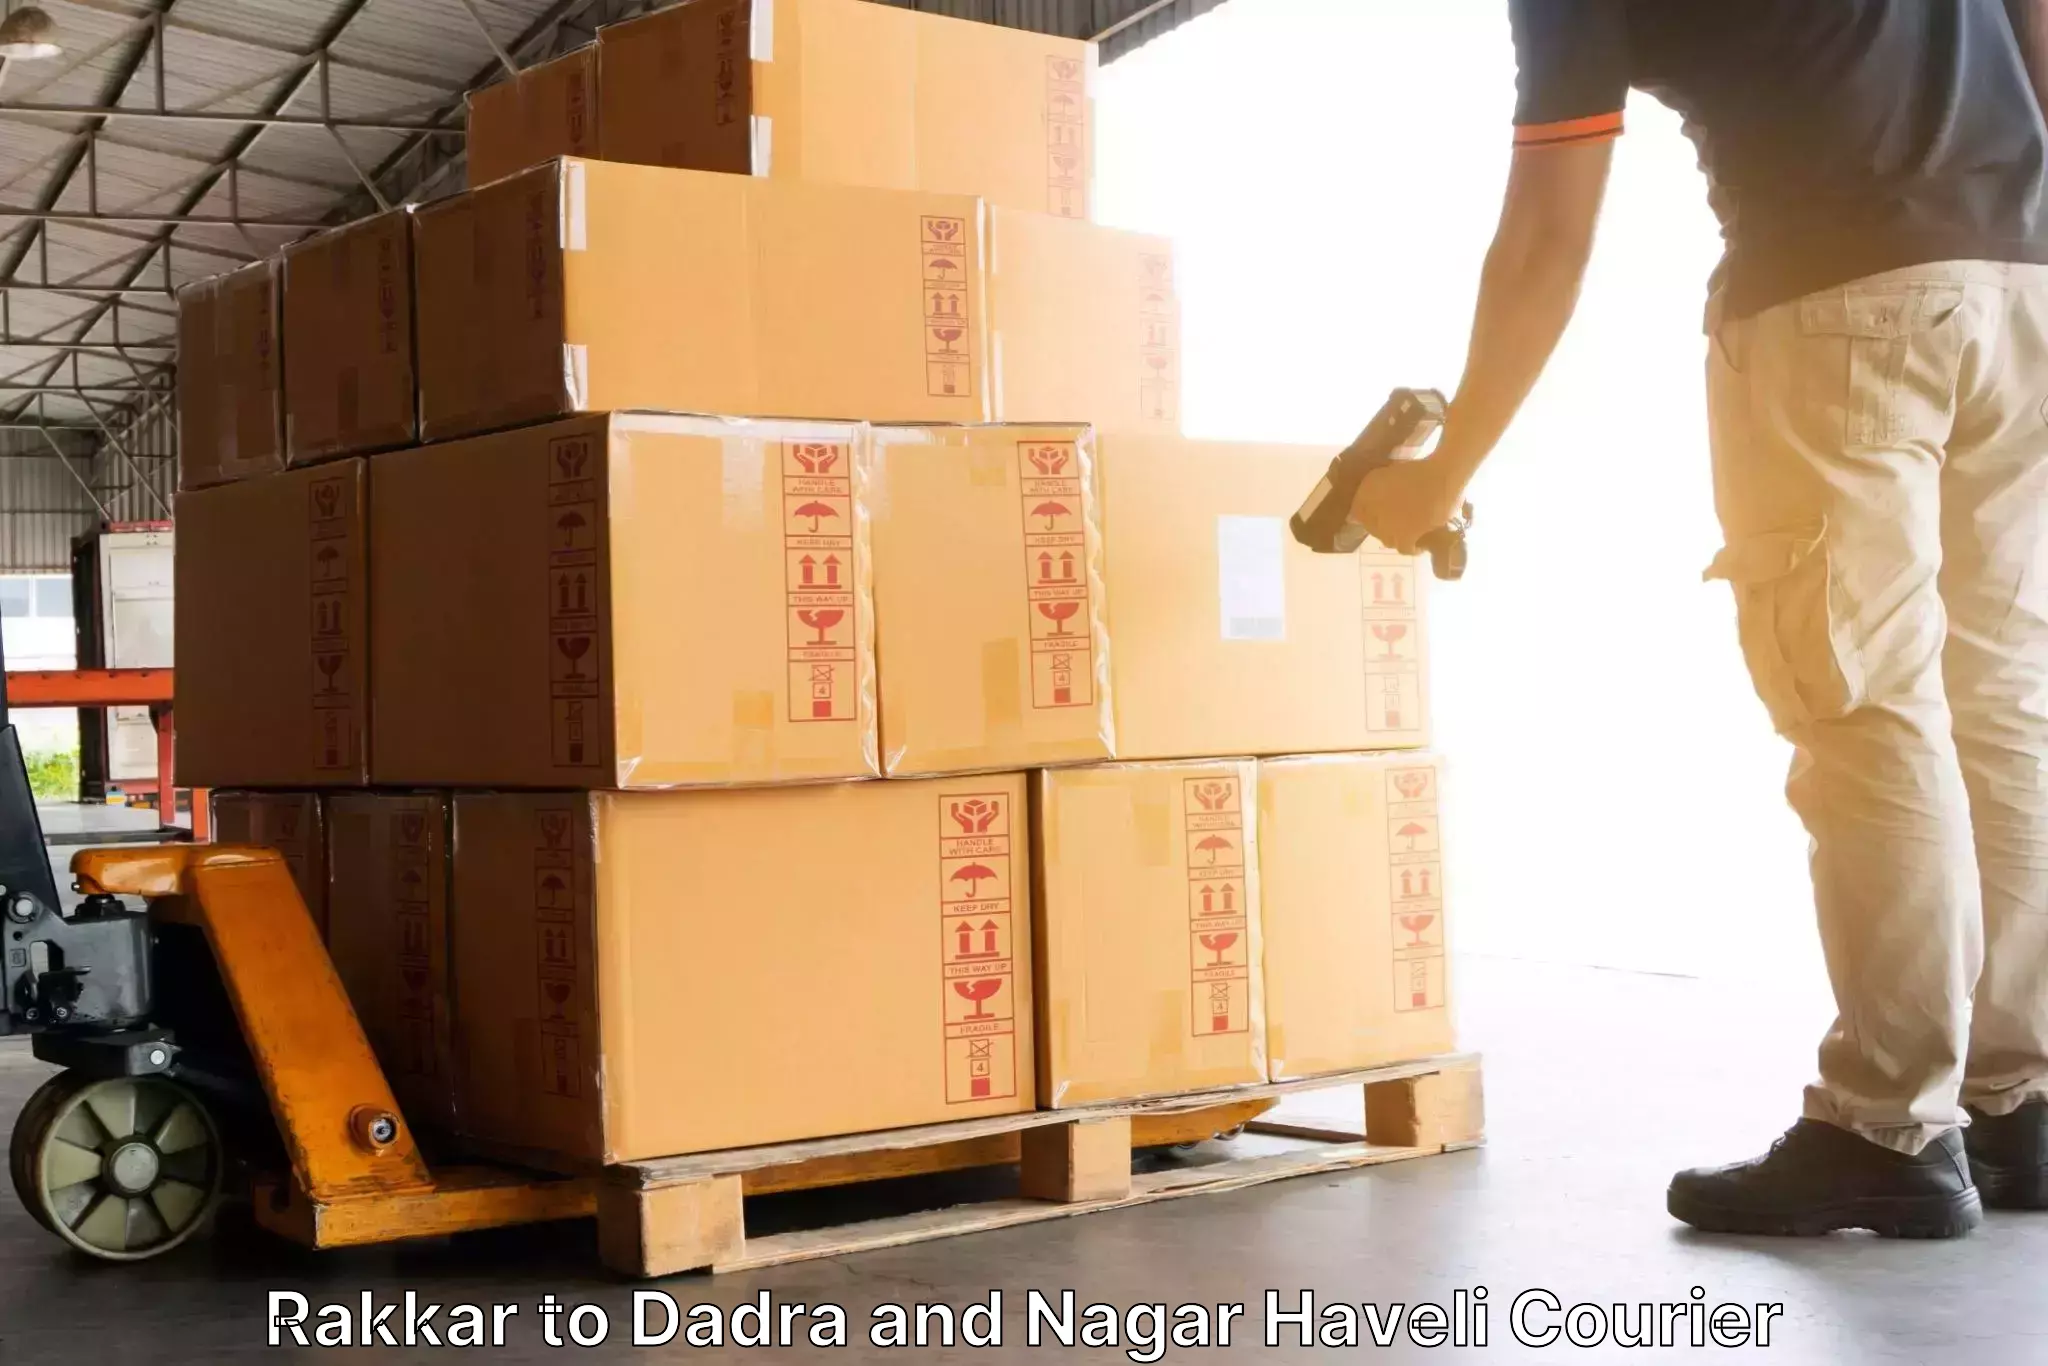 Sustainable delivery practices Rakkar to Dadra and Nagar Haveli